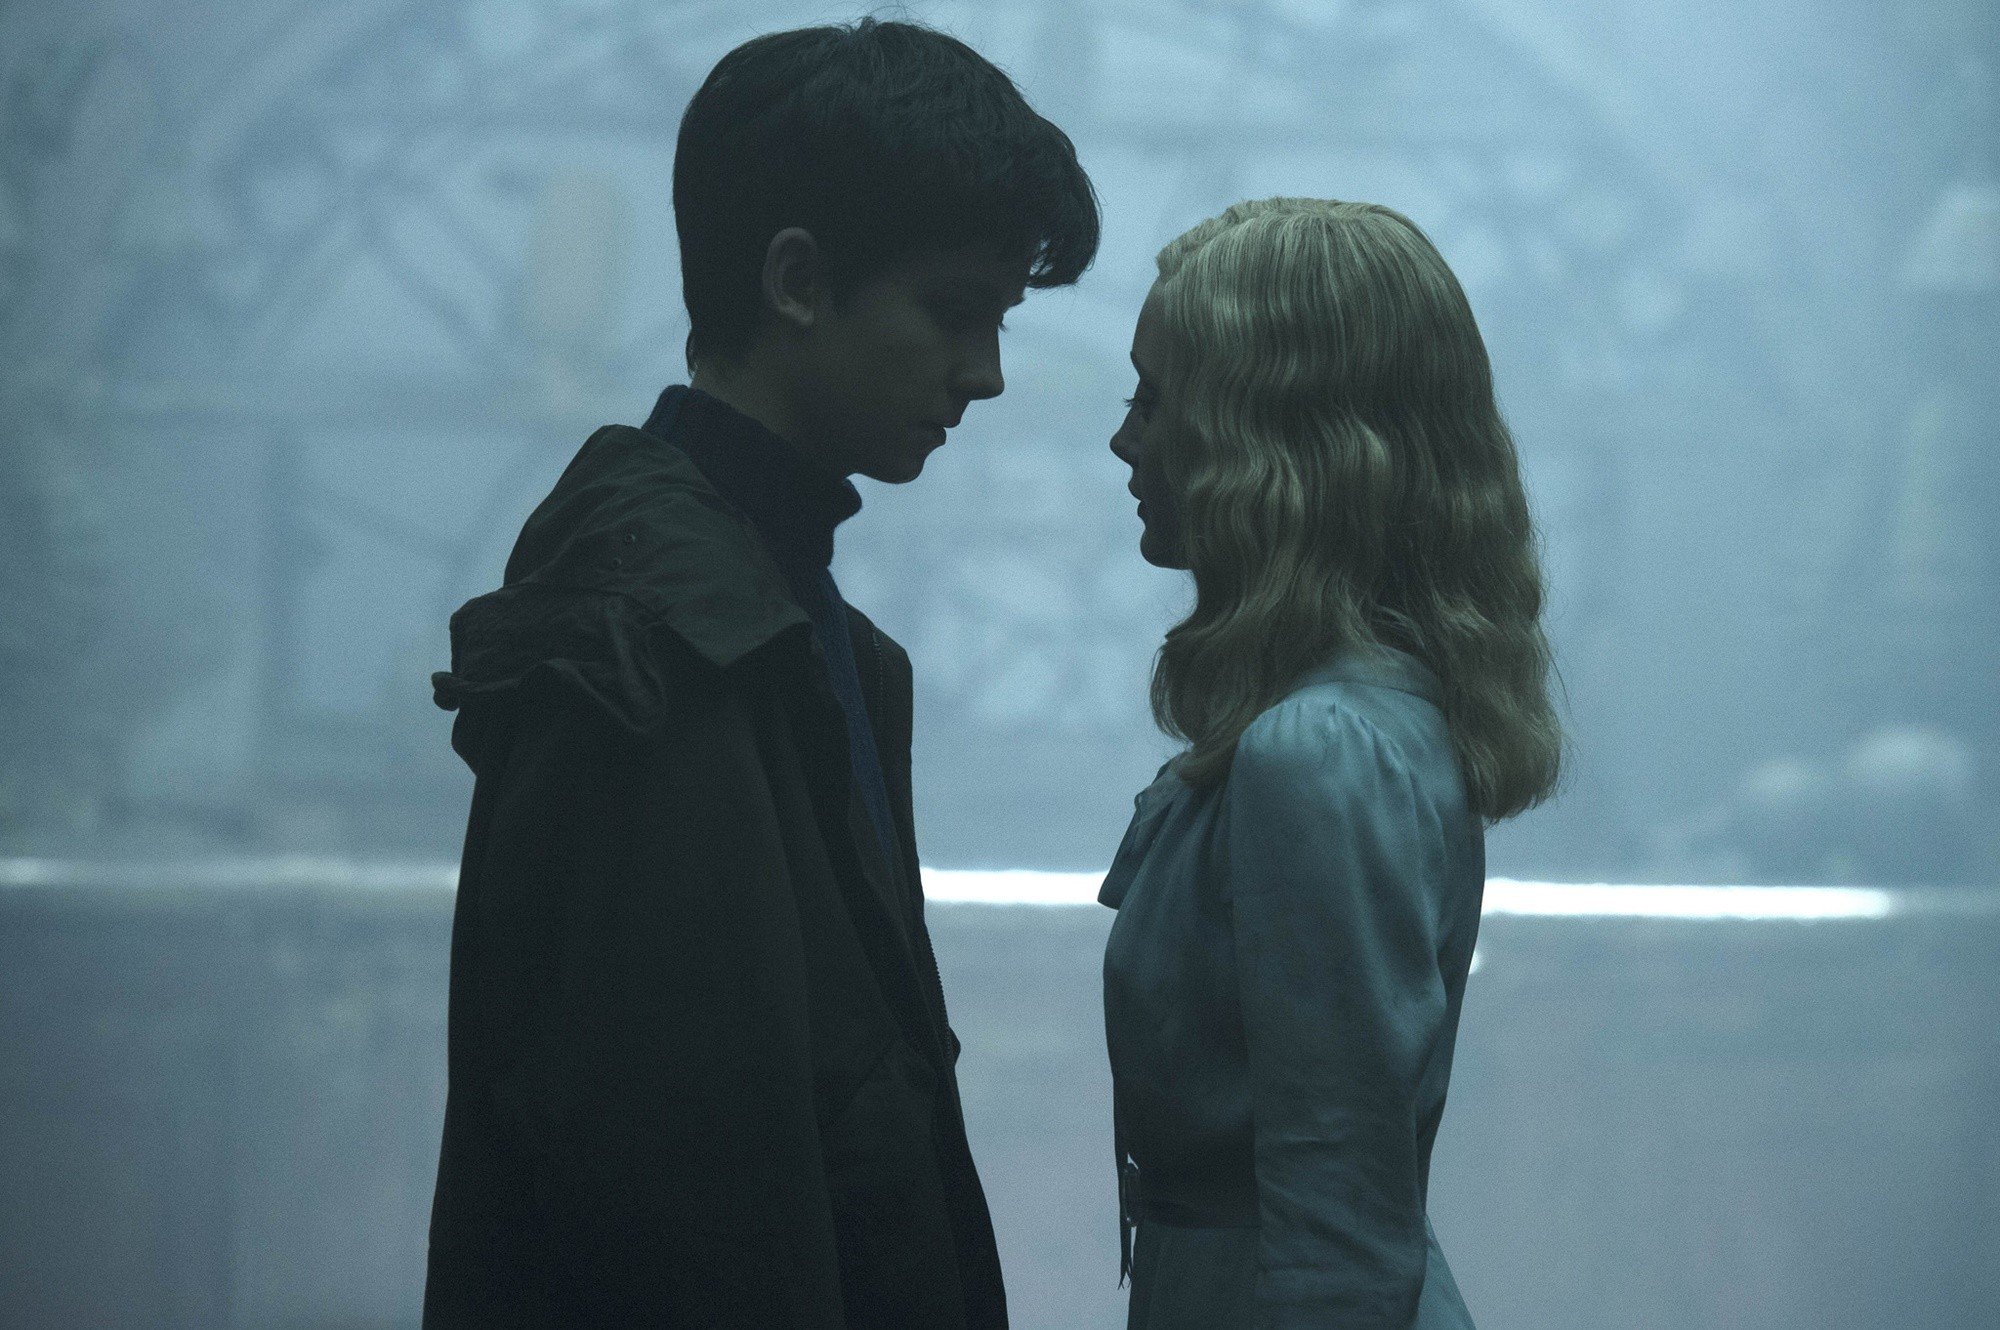 Asa Butterfield stars as Jacob Portman and Ella Purnell stars as Emma Bloom in 20th Century Fox's Miss Peregrine's Home for Peculiar Children (2016)